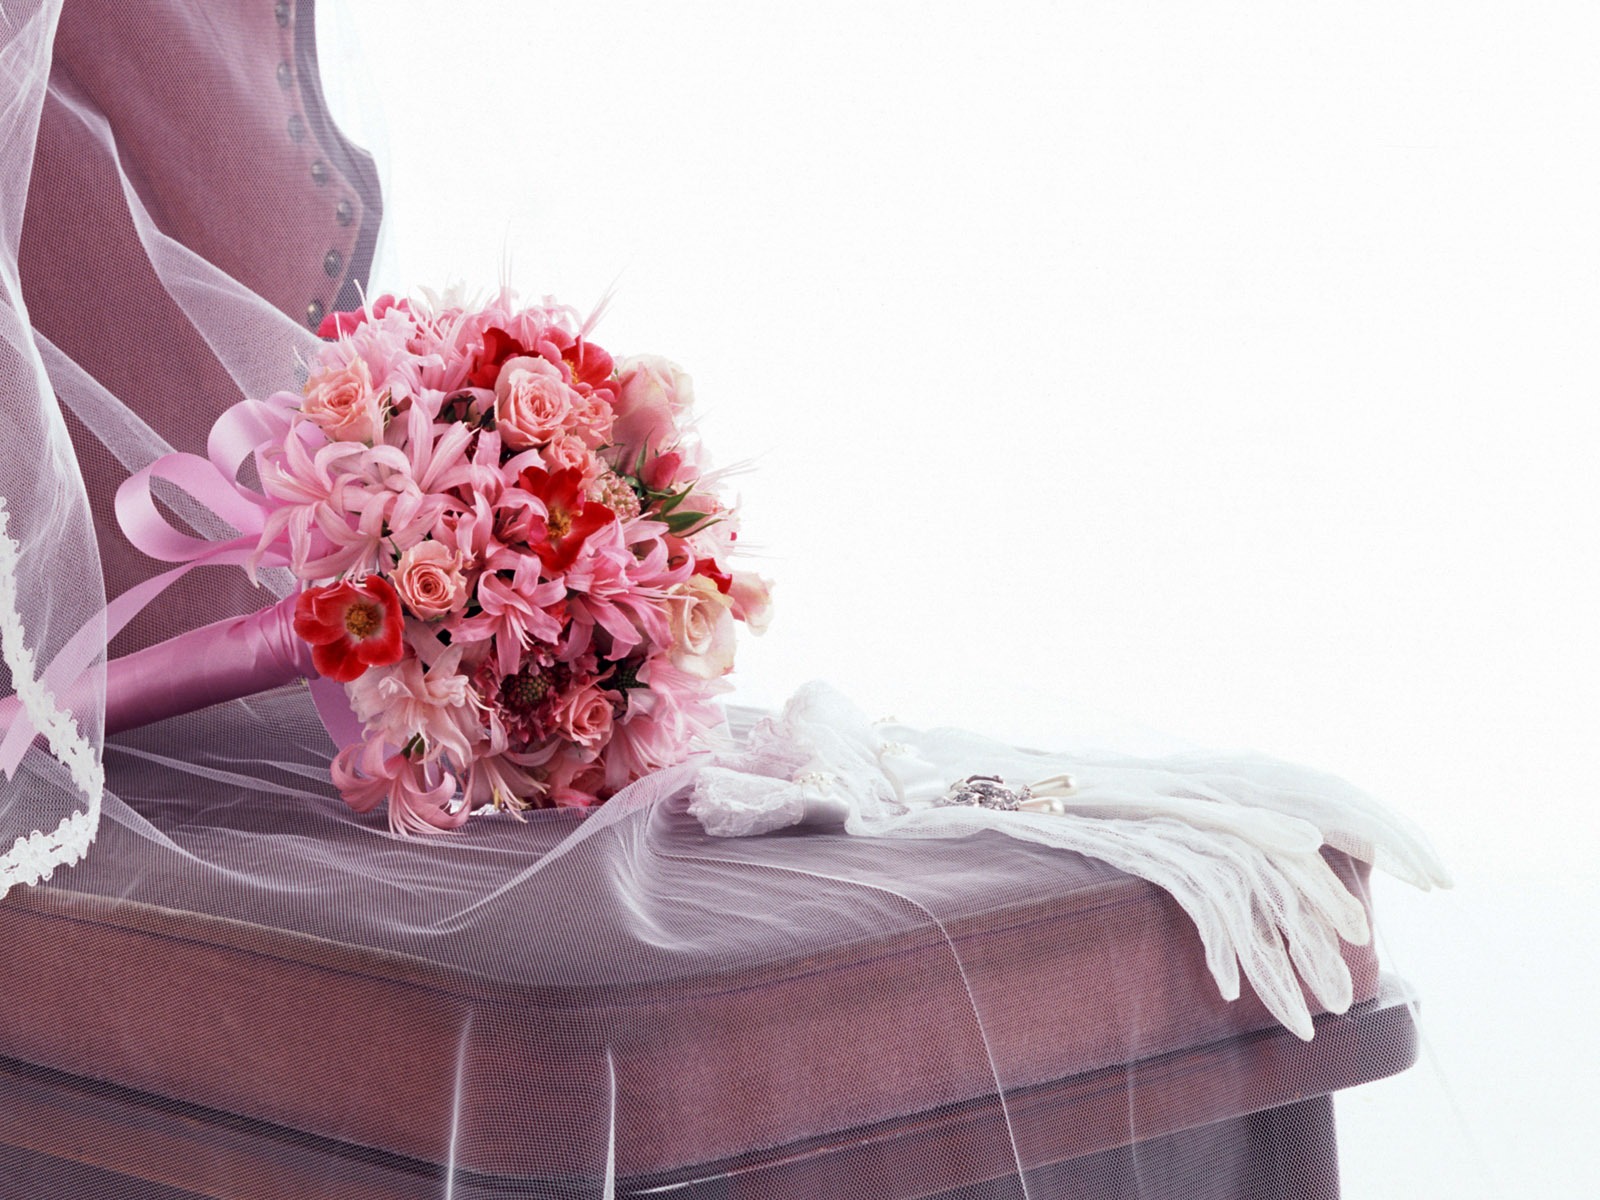 Weddings and Flowers wallpaper (1) #8 - 1600x1200